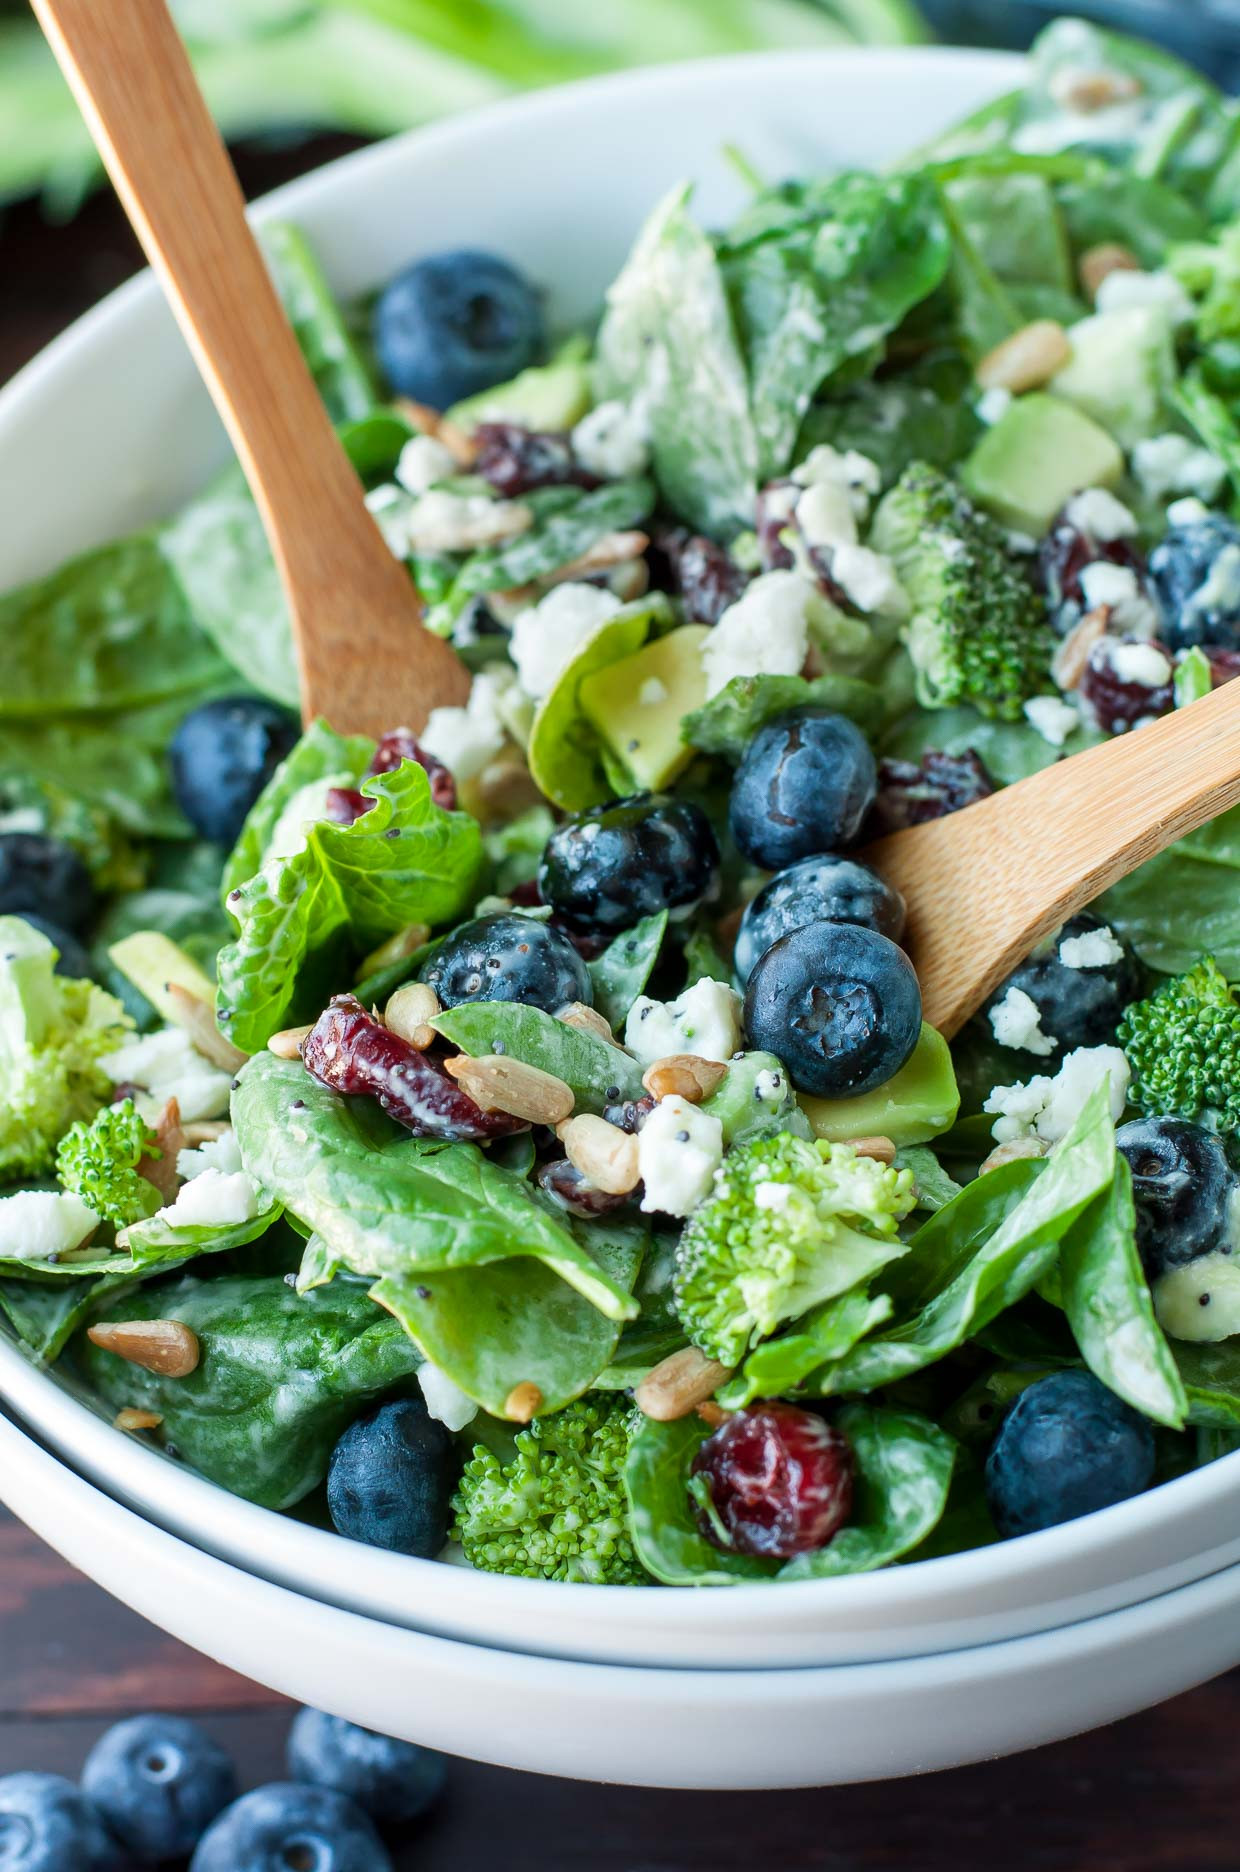 Spinach Salad Dressings Recipes
 Blueberry Broccoli Spinach Salad with Poppyseed Ranch